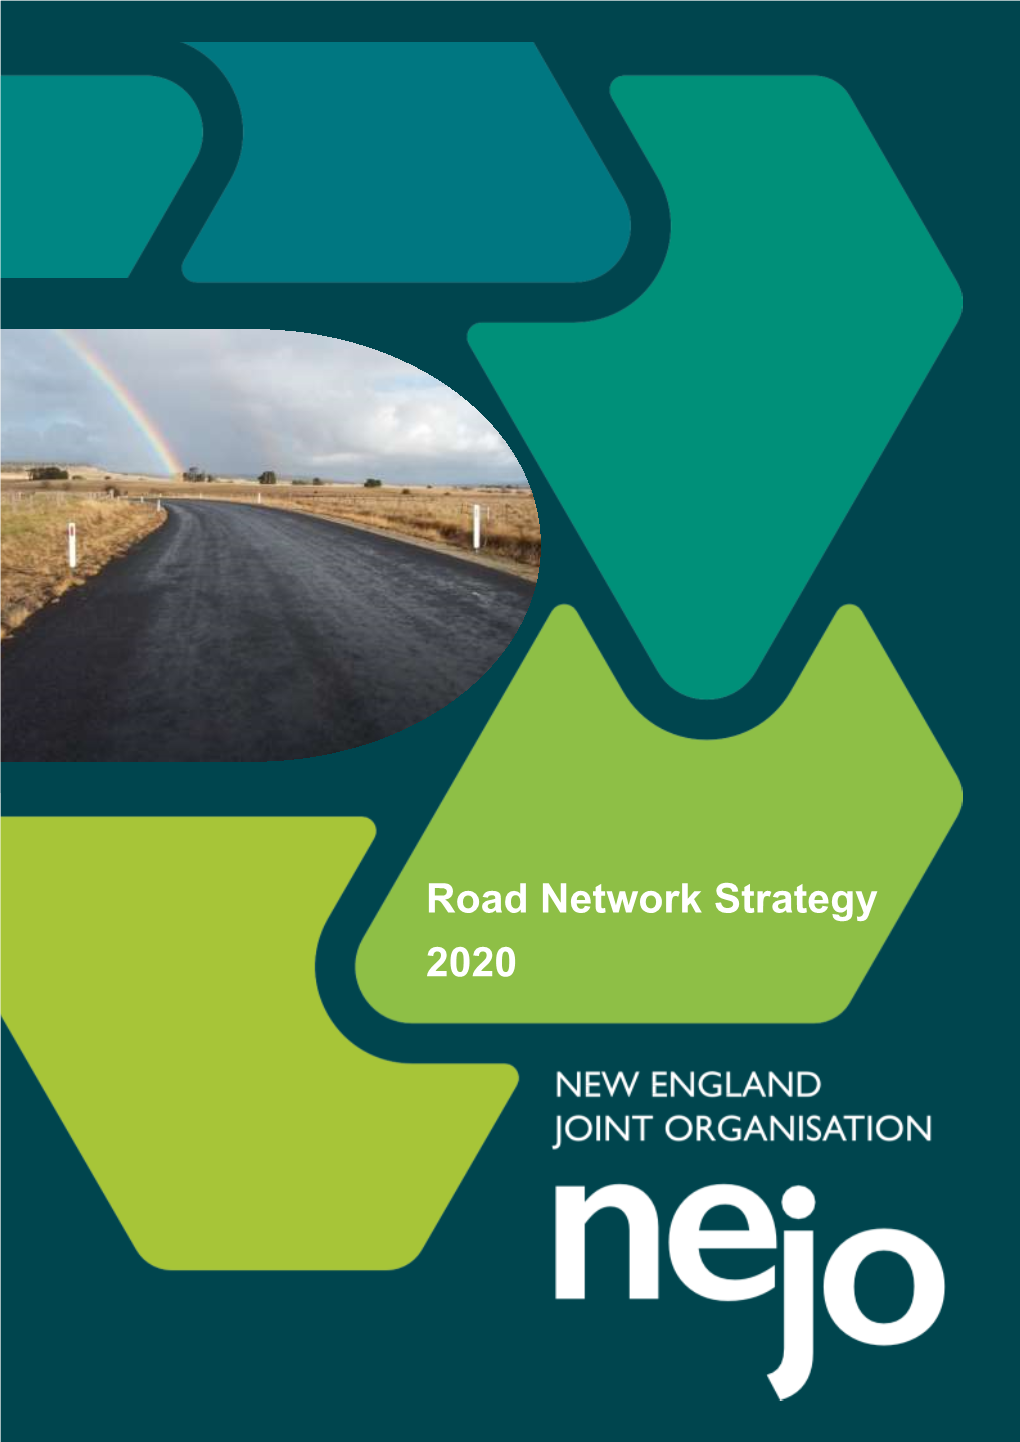 New England Road Network Strategy 2020